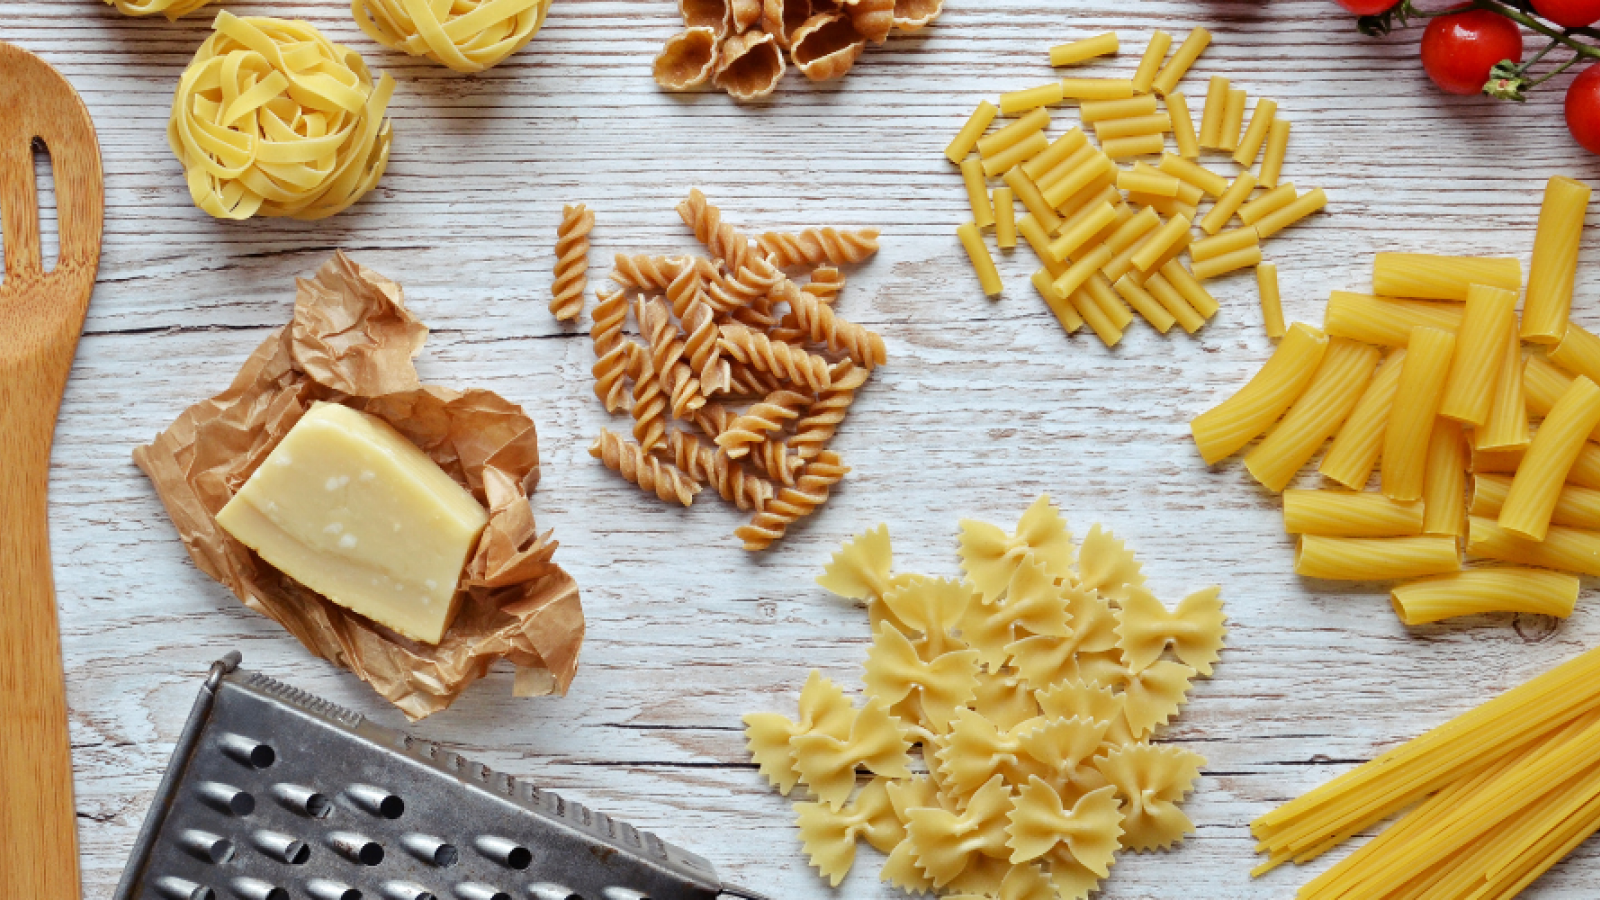 https://myfoodbook.com.au/sites/default/files/styles/16x9/public/collections_image/pasta%20shapes.png